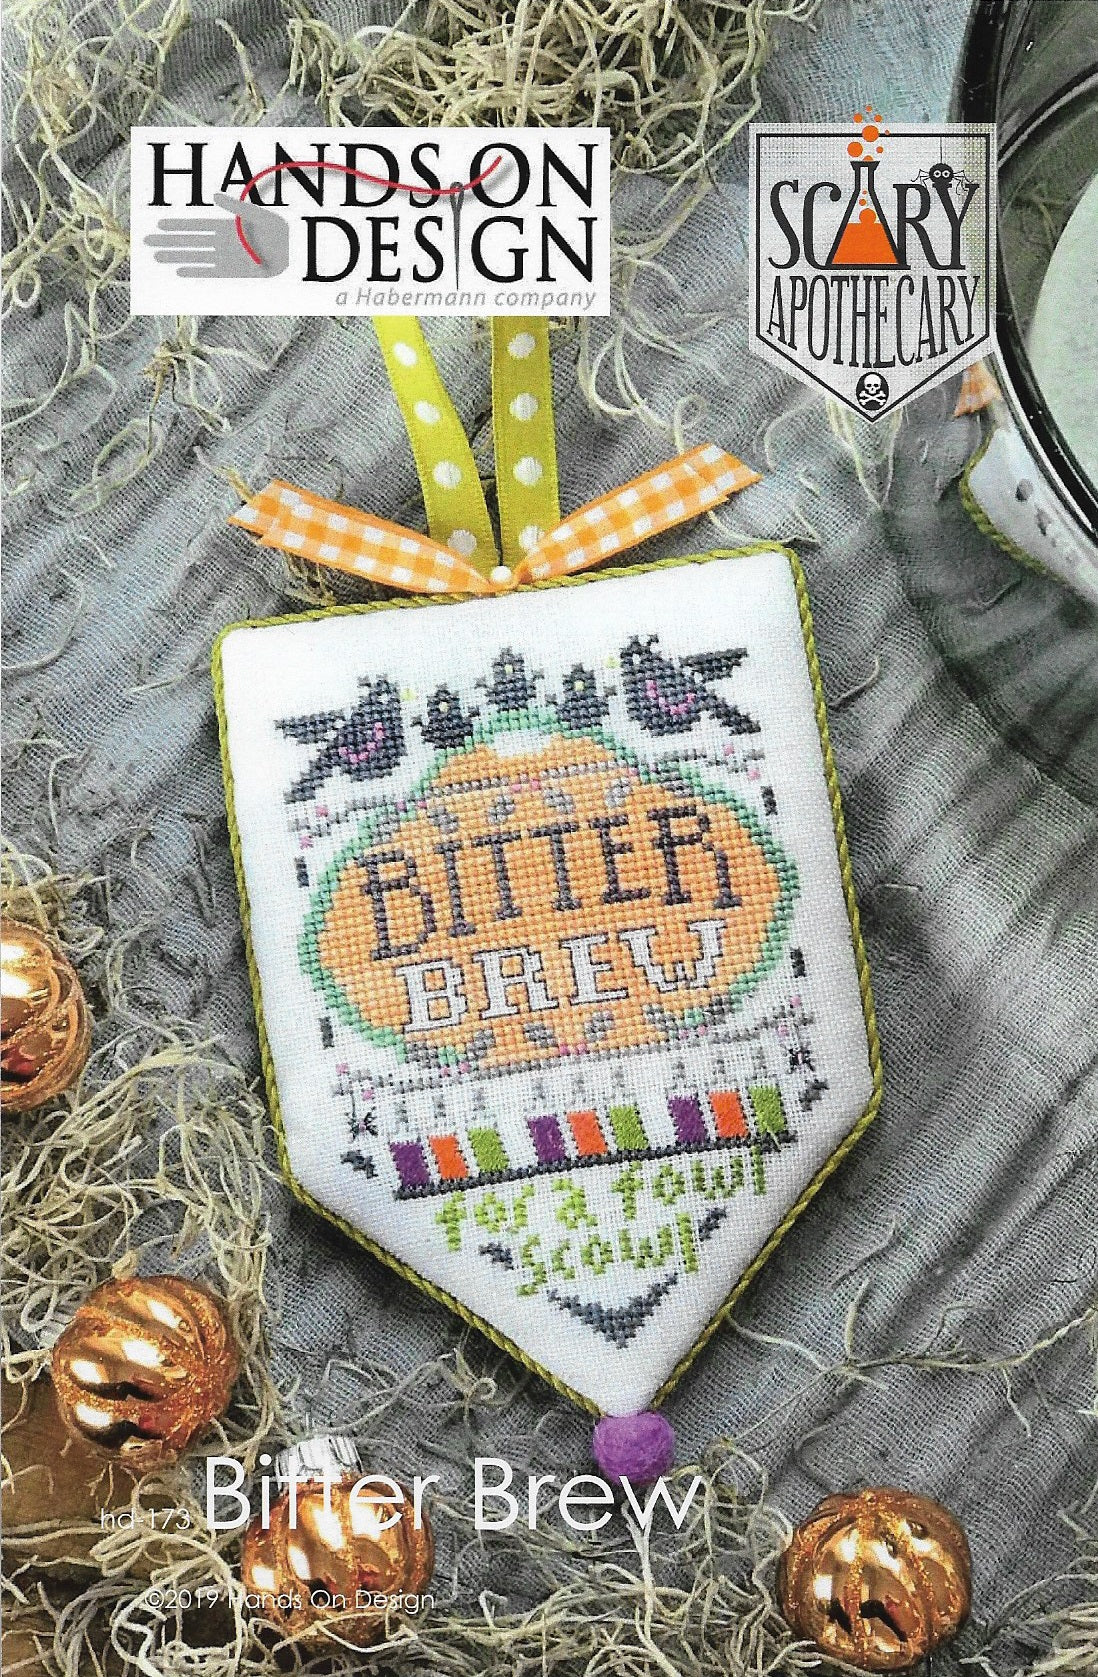 Hands on Design Bitter Brew Scary Apothecary HD-173 Halloween Ornament cross stitch pattern